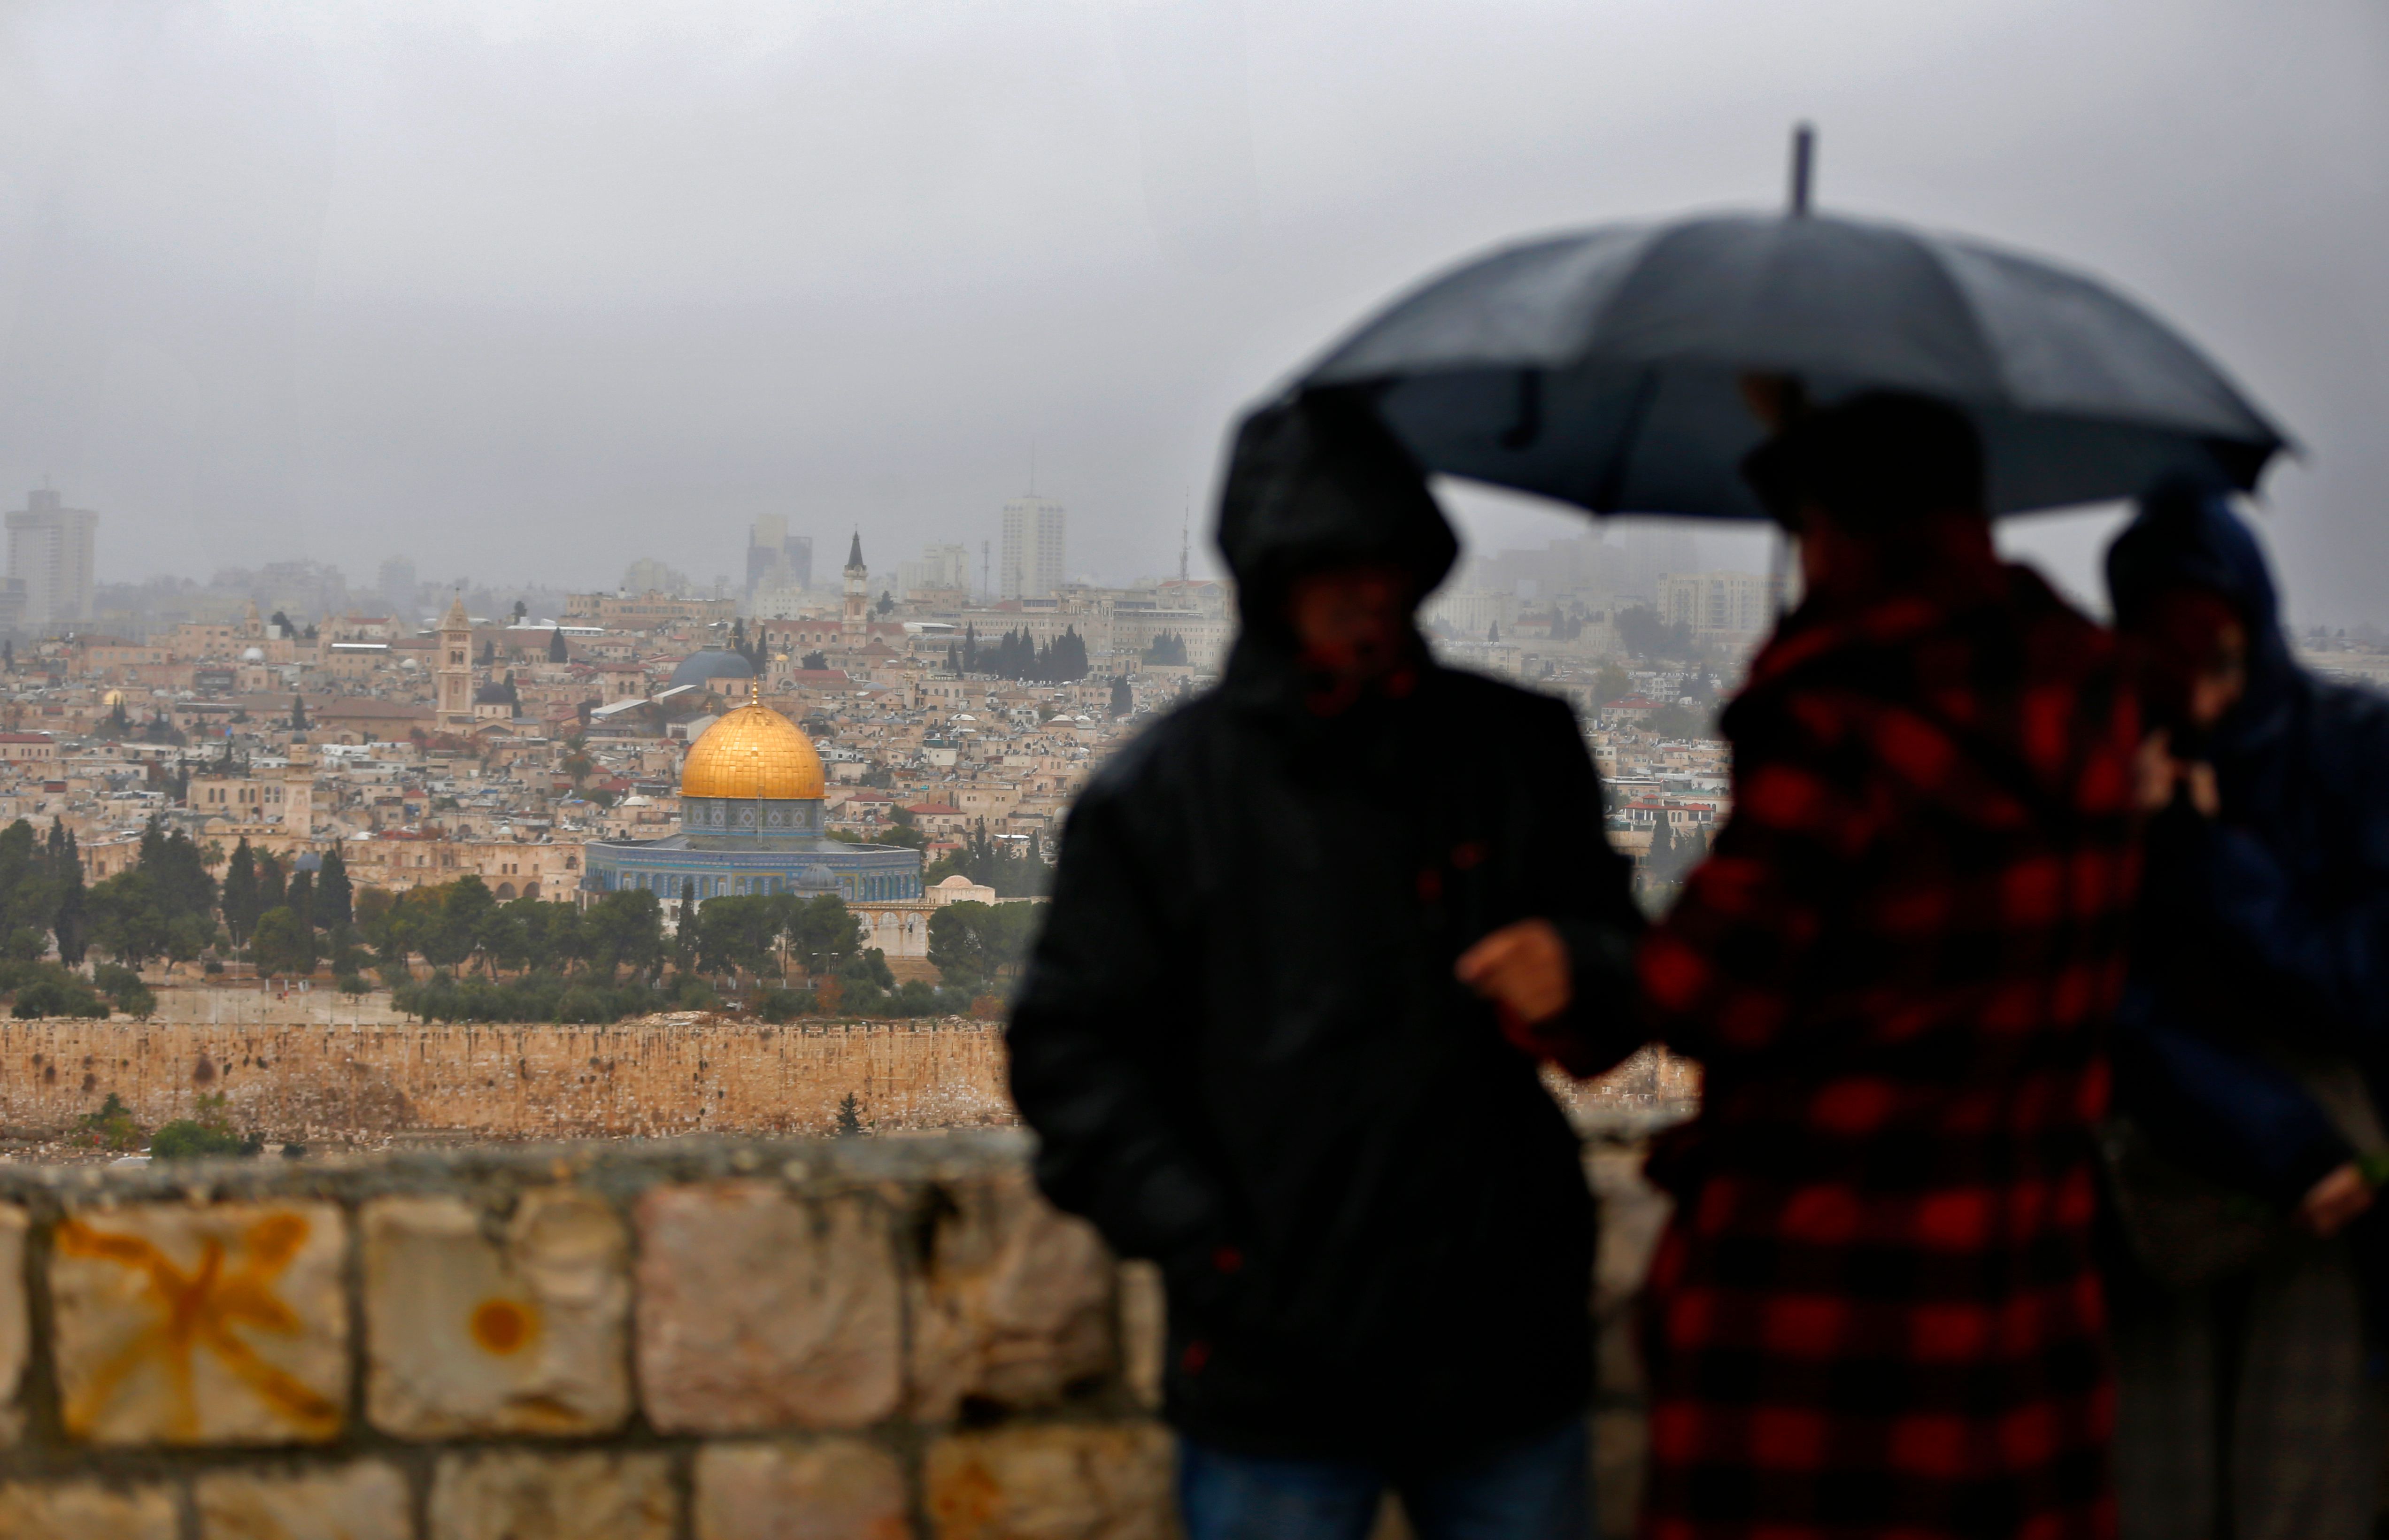 People stand at Mount of Olives and look at the Old City of Jerusalem and its Dome of the Rock mosque in the centre, on December 6, 2017. President Donald Trump is set to recognise Jerusalem as Israel's capital, upending decades of careful US policy and ignoring dire warnings from Arab and Western allies alike of a historic misstep that could trigger a surge of violence in the Middle East. / AFP PHOTO / AHMAD GHARABLI (Photo credit should read AHMAD GHARABLI/AFP/Getty Images)